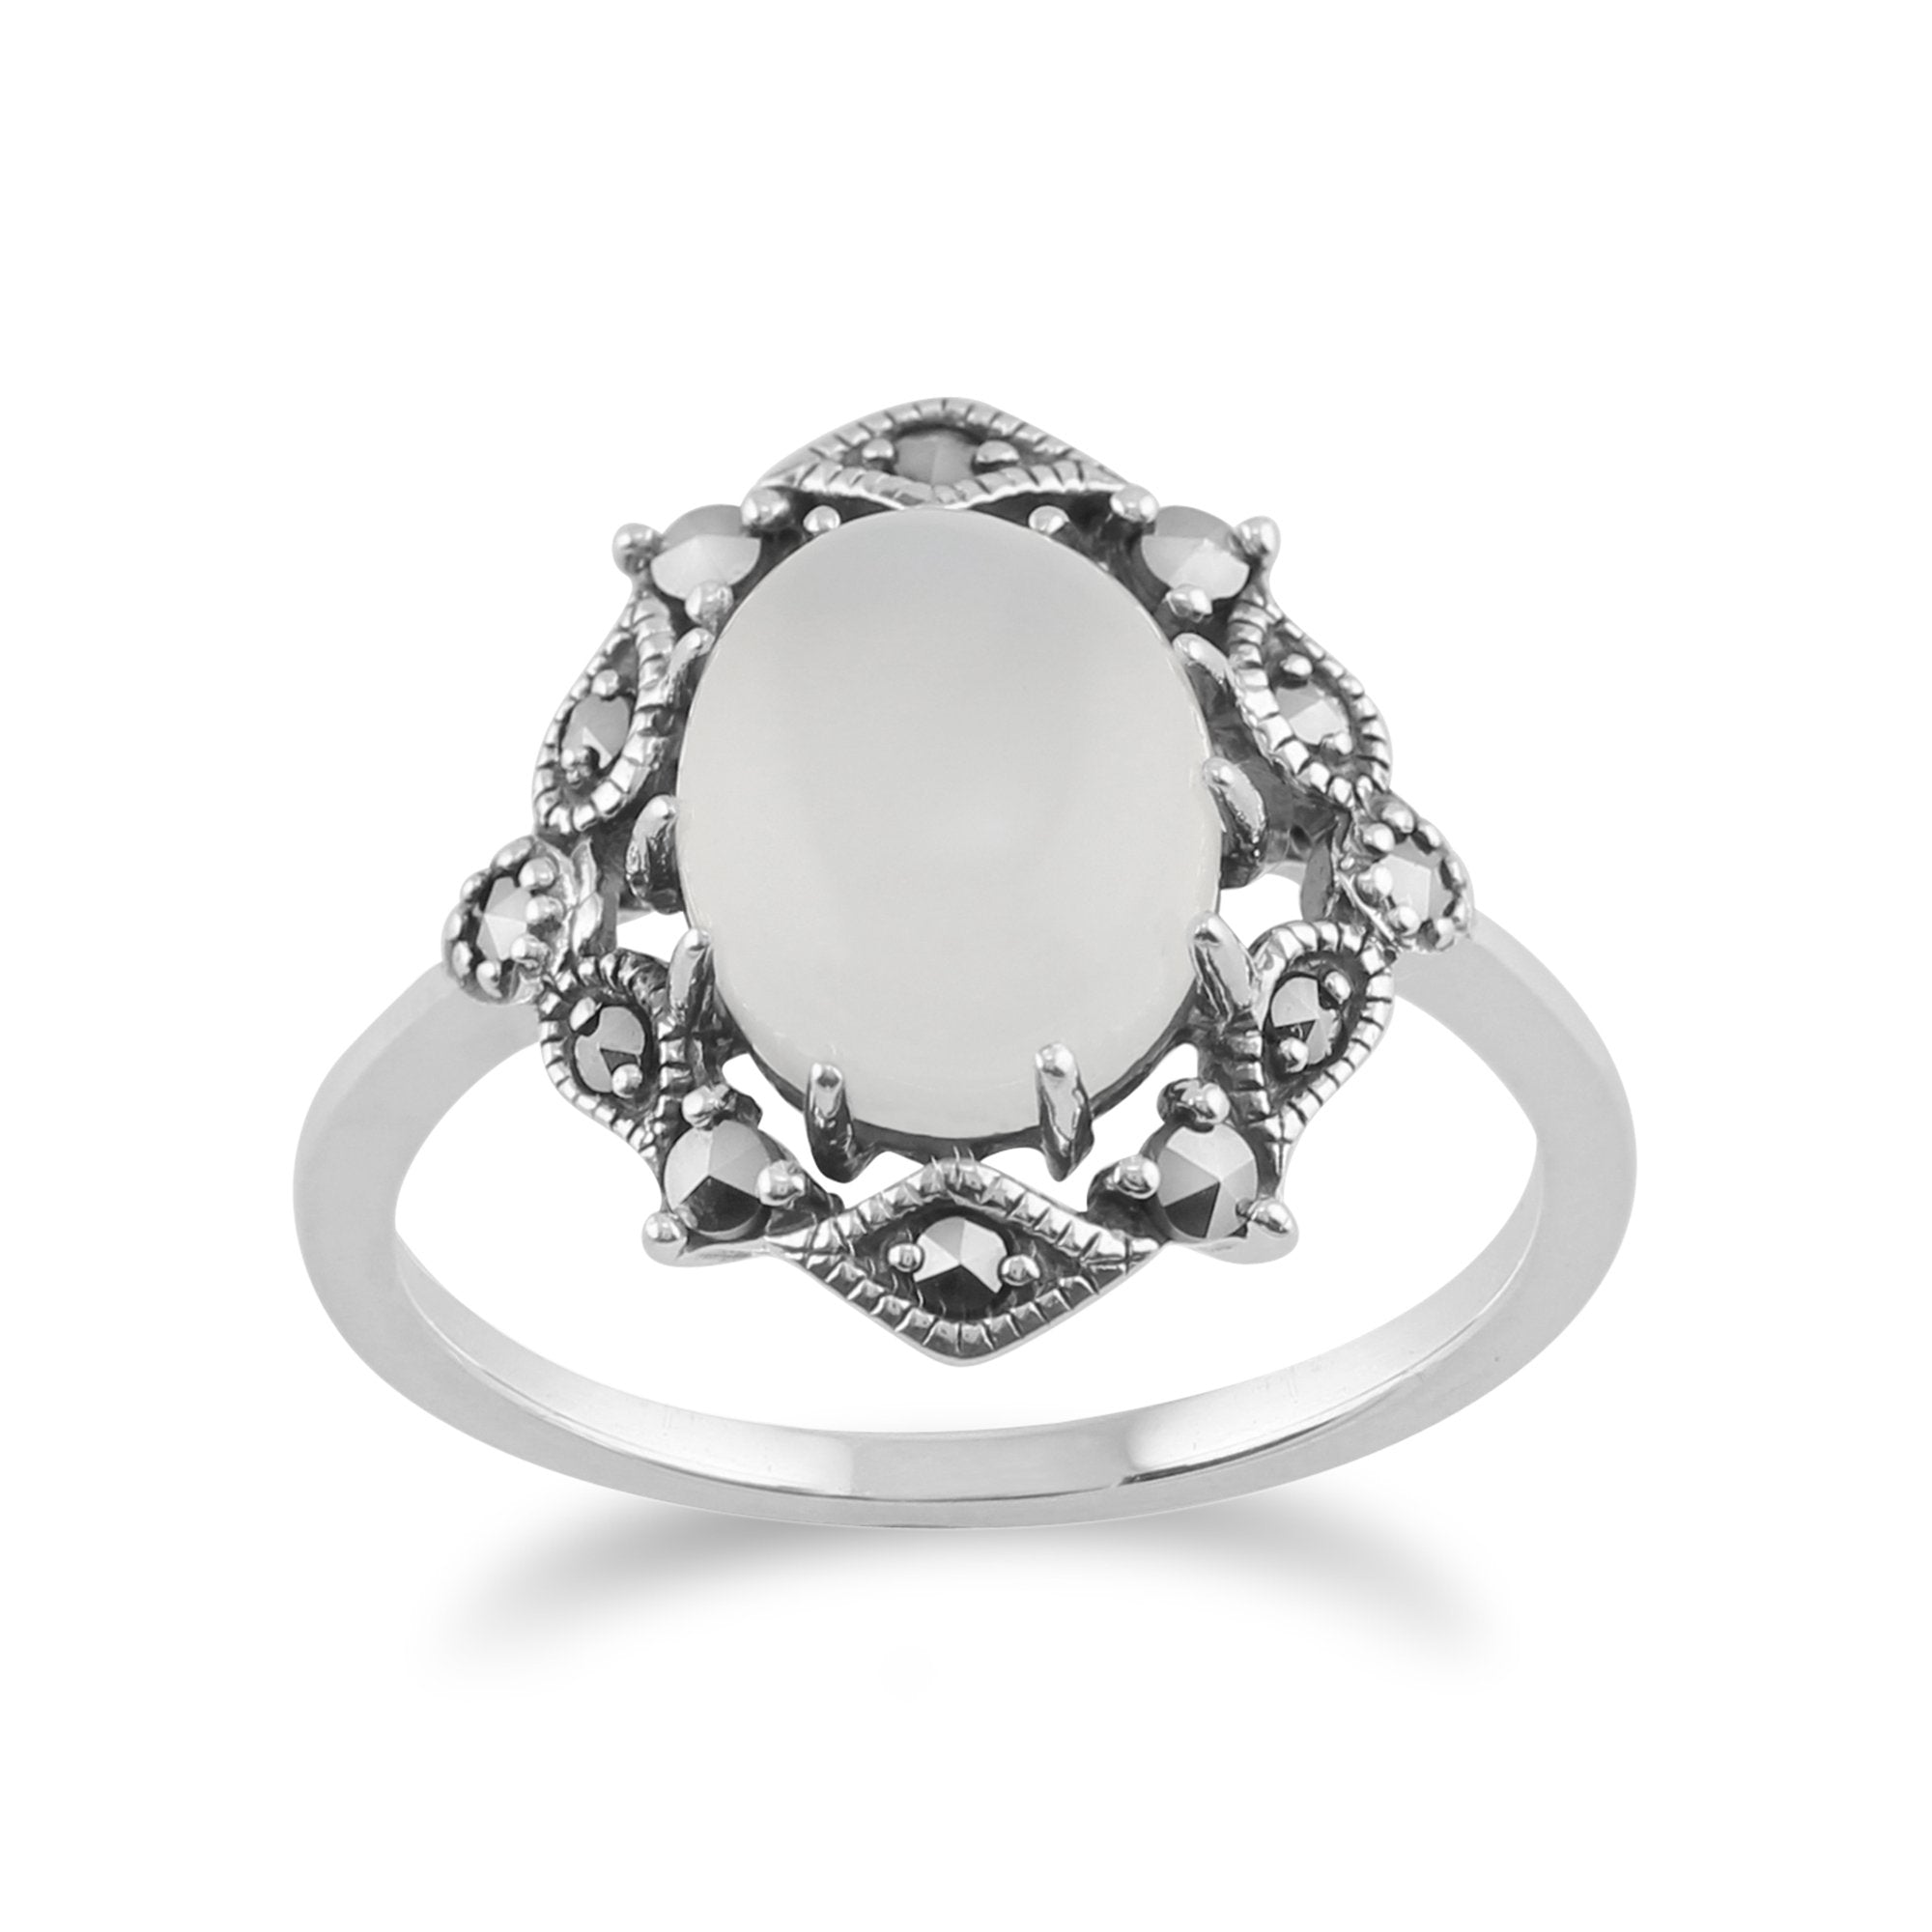 Art Nouveau Style Oval Moonstone Cabochon & Marcasite Statement Ring in 925 Sterling Silver